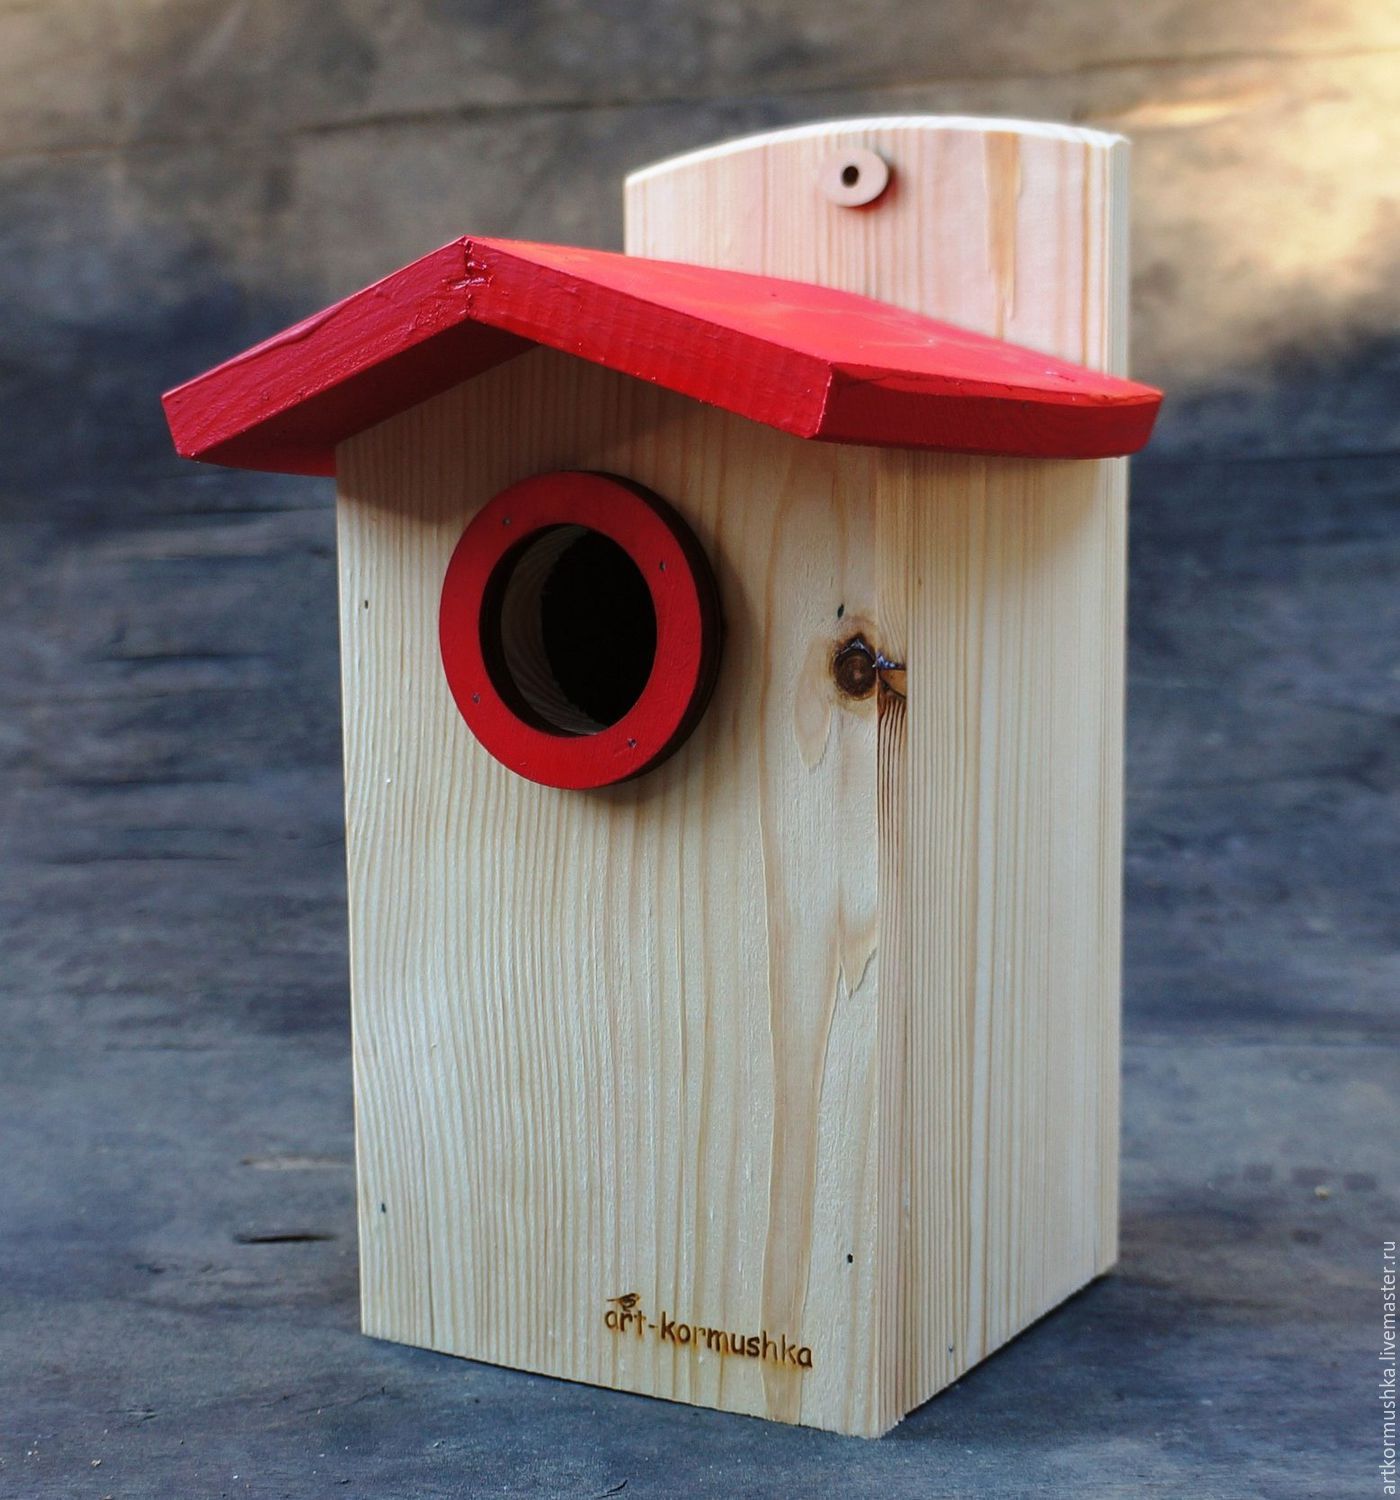 Birdhouse for the birds - cozy house for starlings
